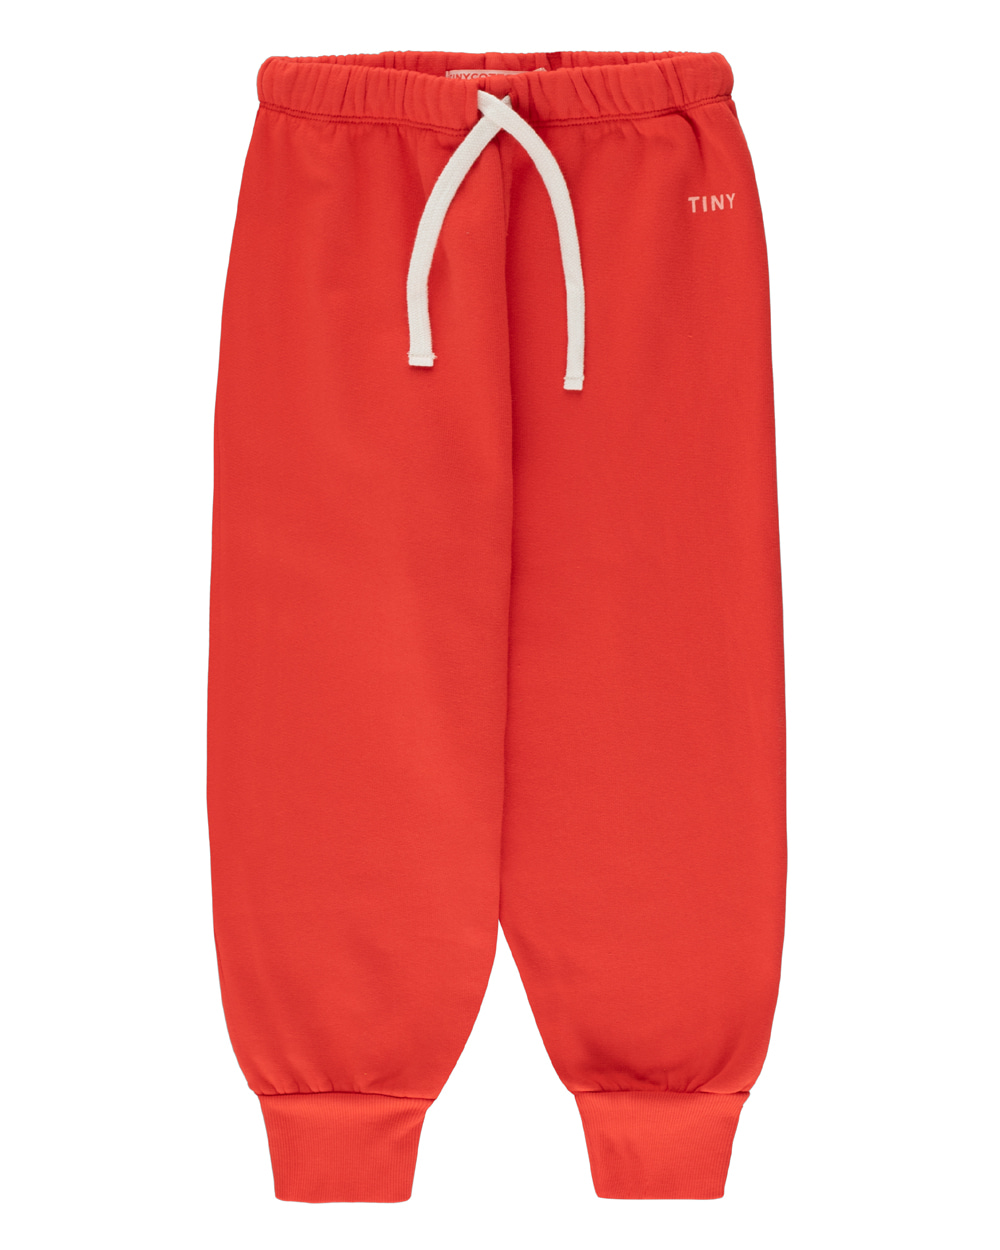 [TINY COTTONS]TINY SWEATPANT /deep red [12Y]